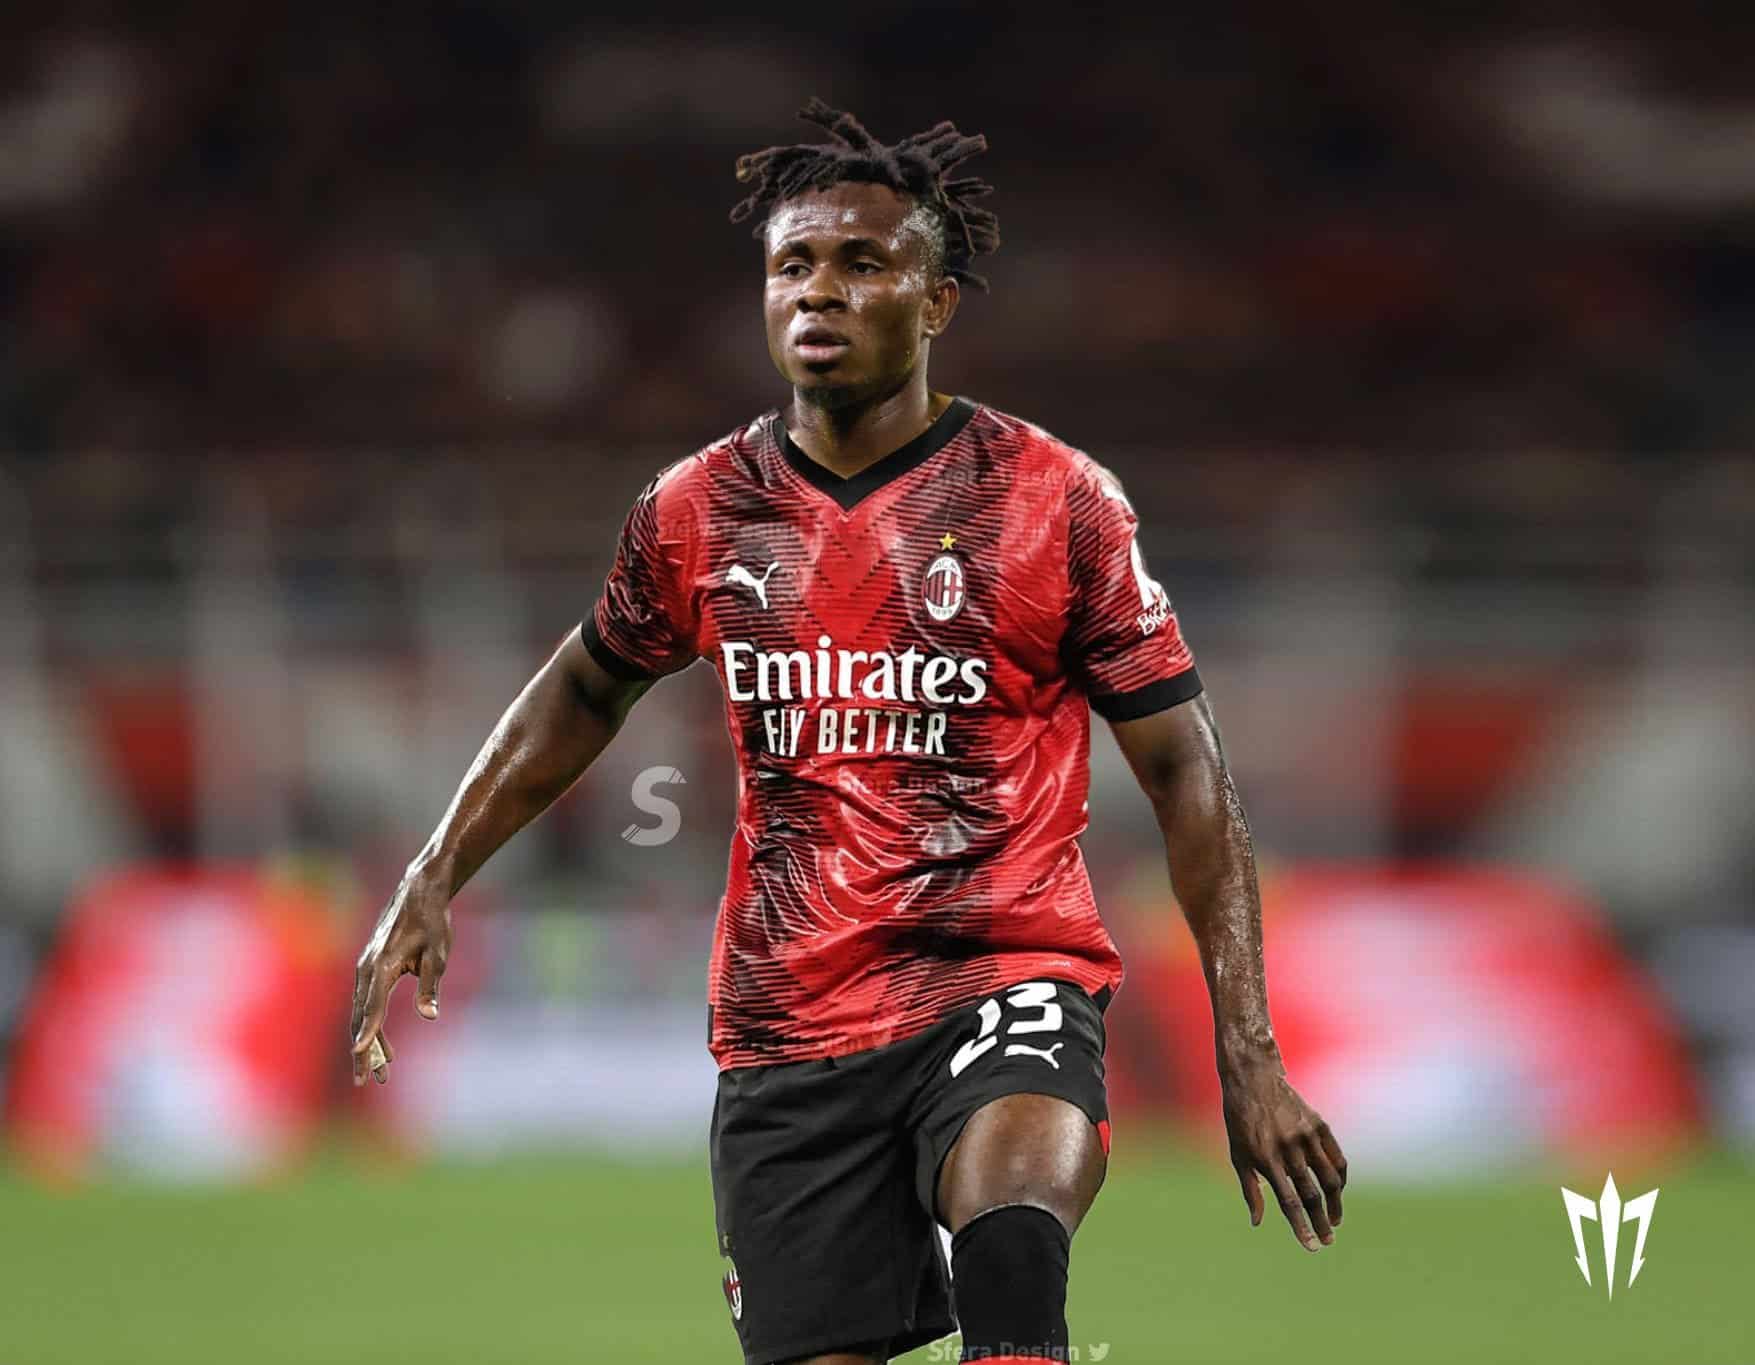 Super Eagles' Chukwueze Picks Hamstring Injury, To Miss AC Milan Matches - Club Reports